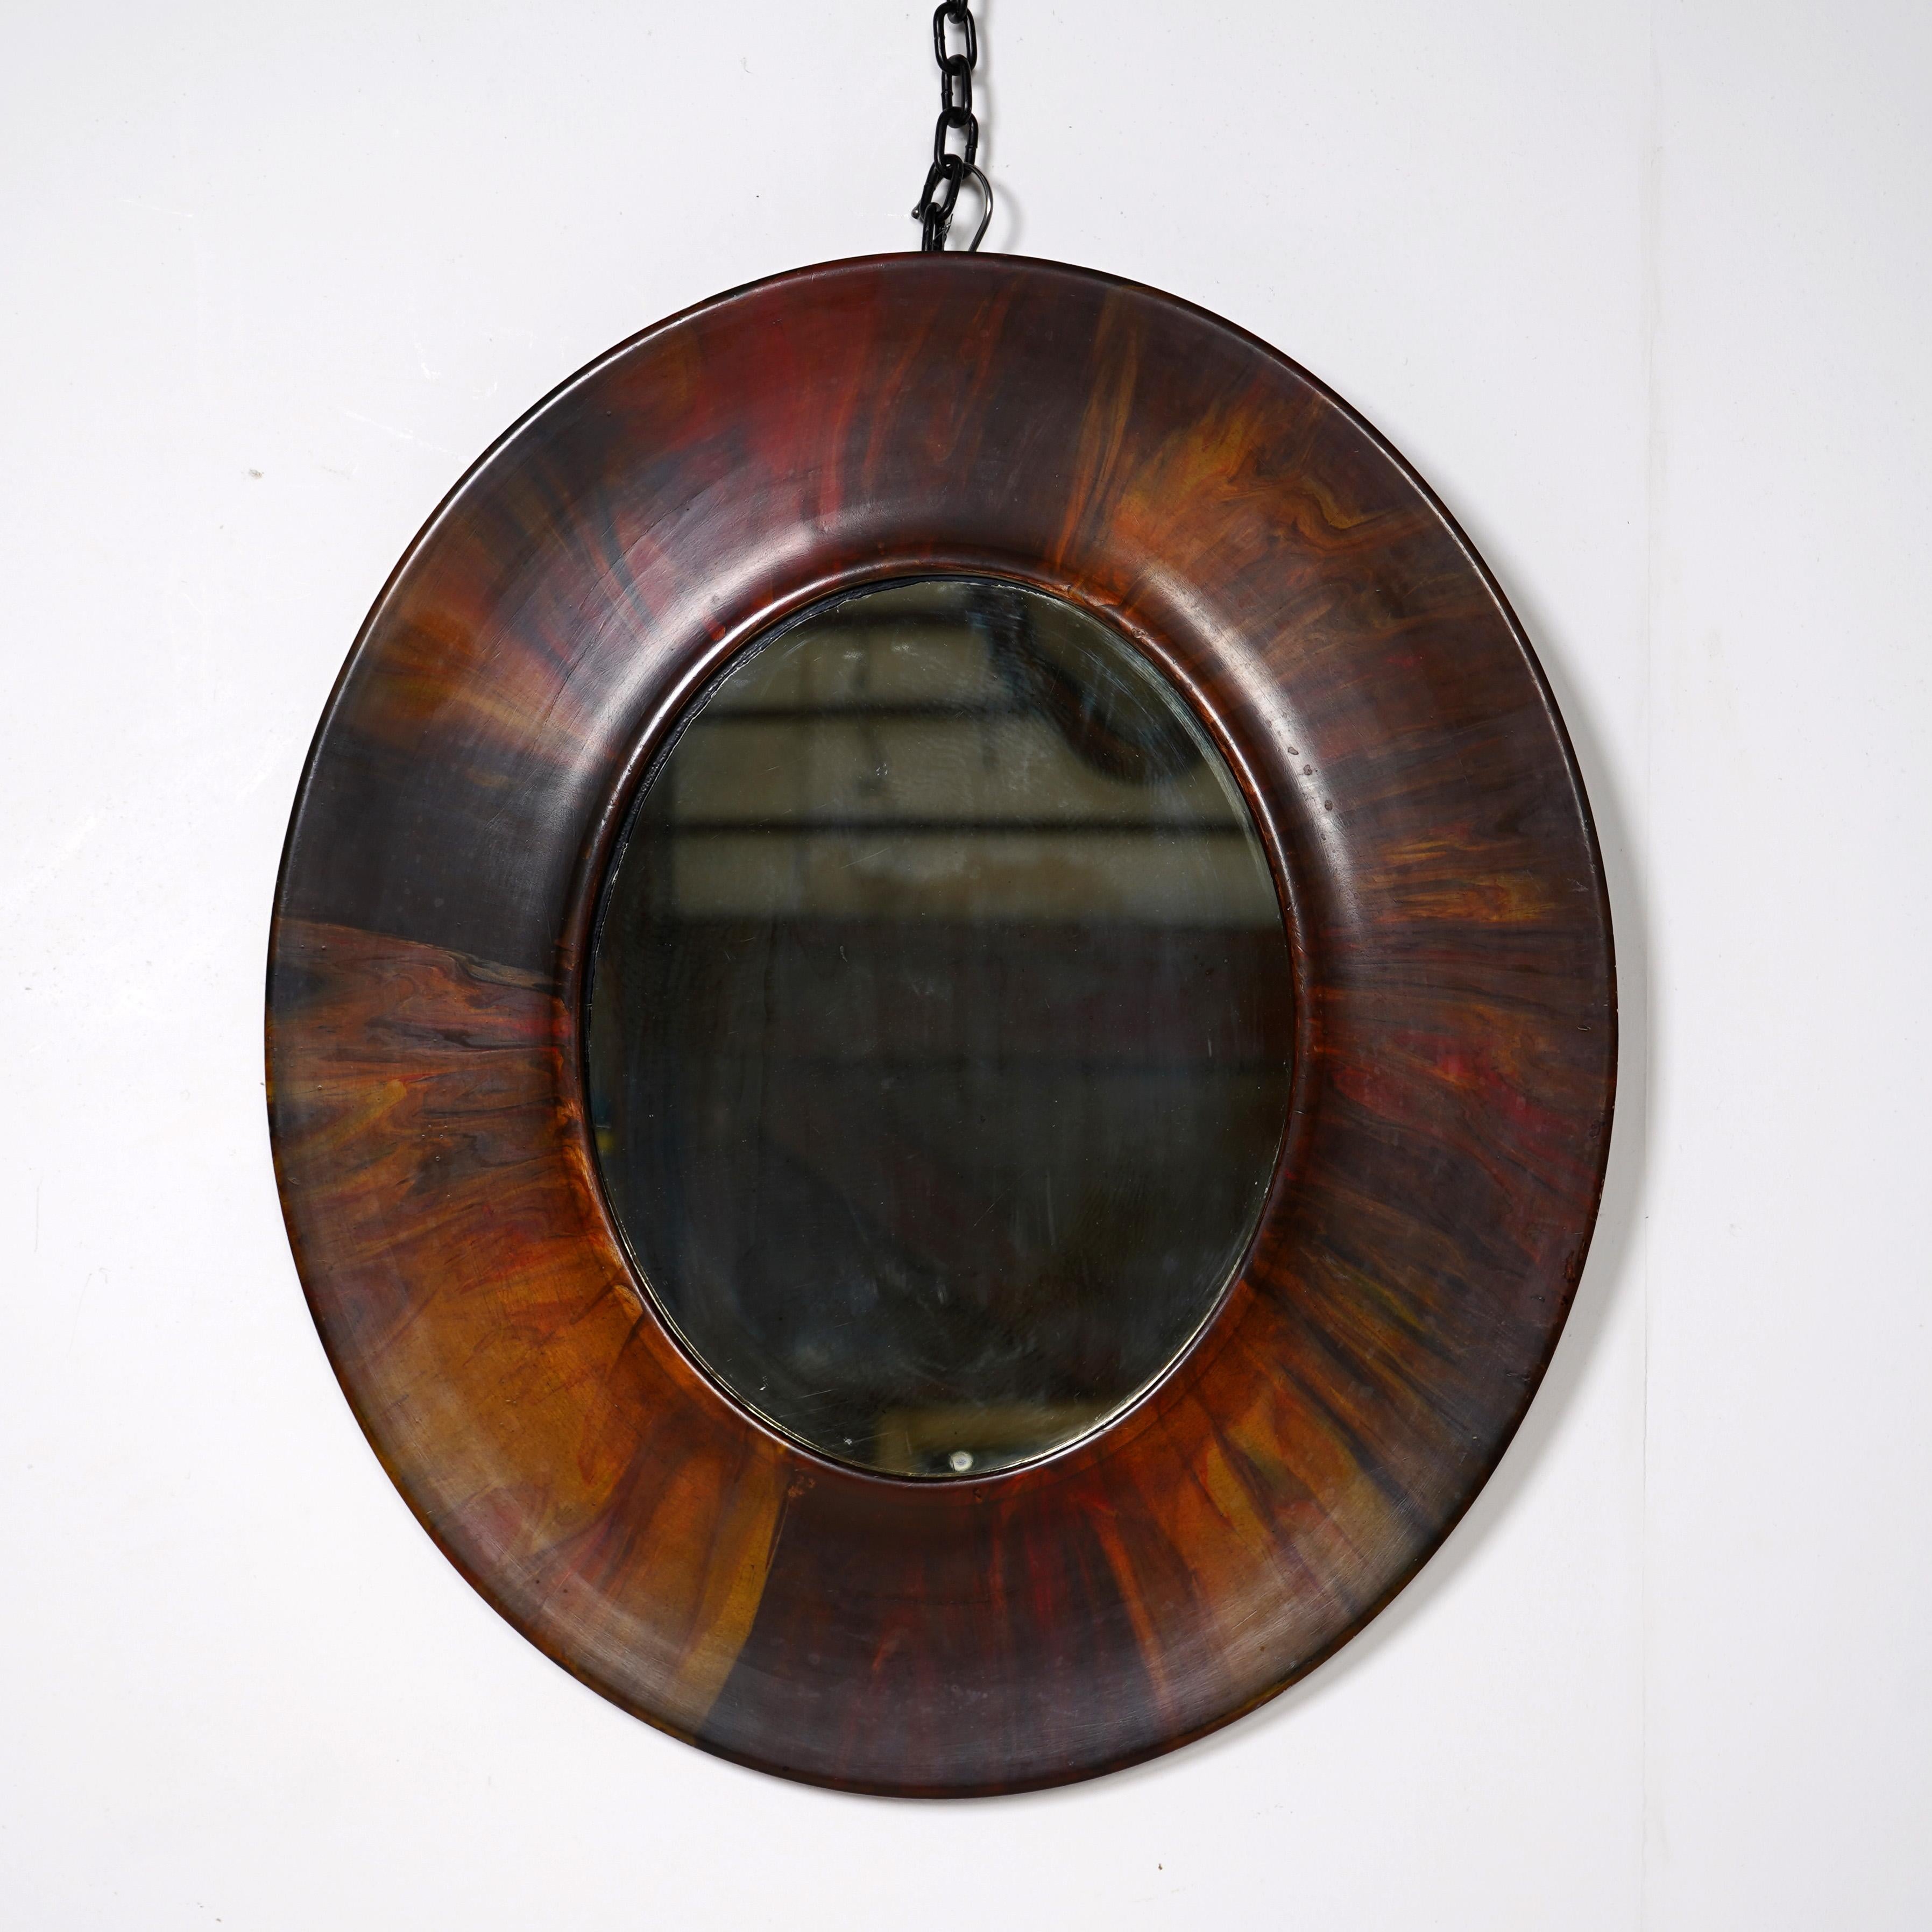 Early to mid 20th Century oval mirror with beautiful brown marbled gloss finish. The stunning patterns look like an iris and when up on the wall it really comes into its own. Condition is great, some minor foxing on the original mirror plate.
